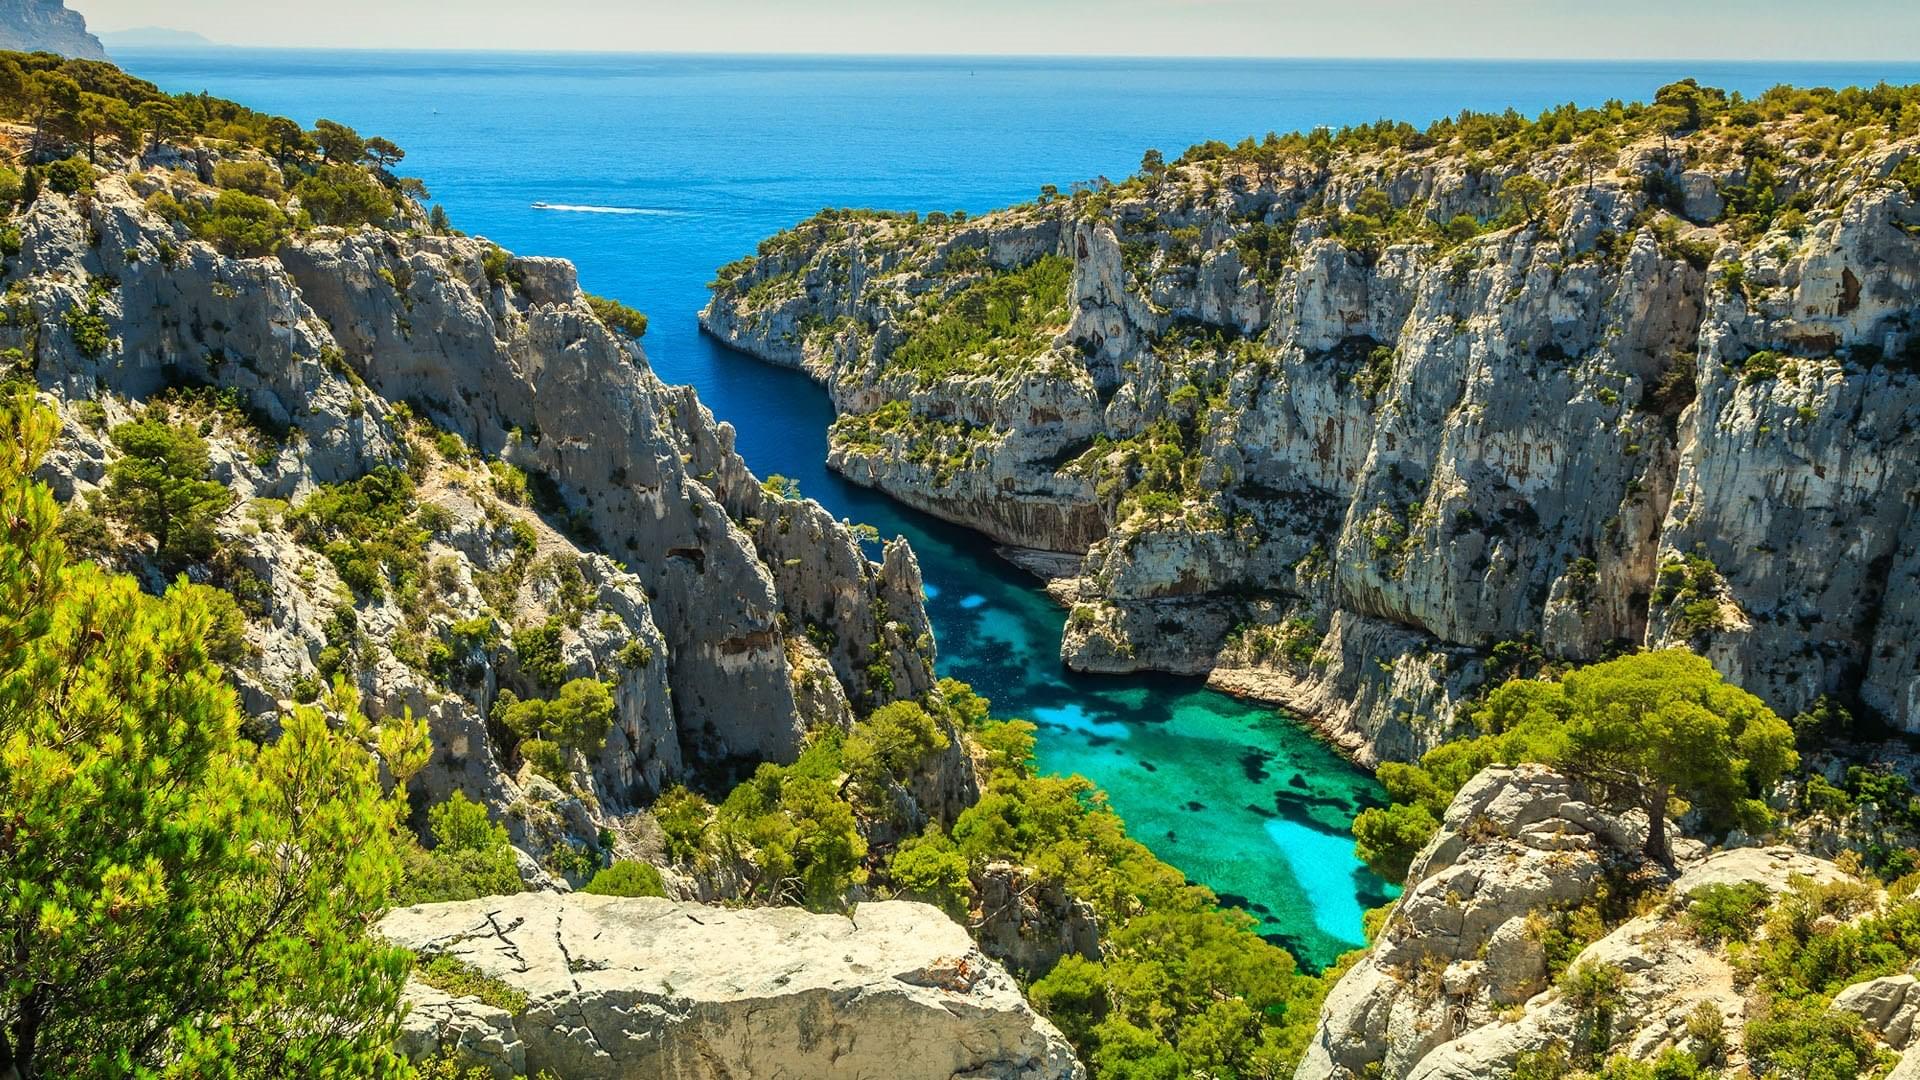 Calanques National Park Overview